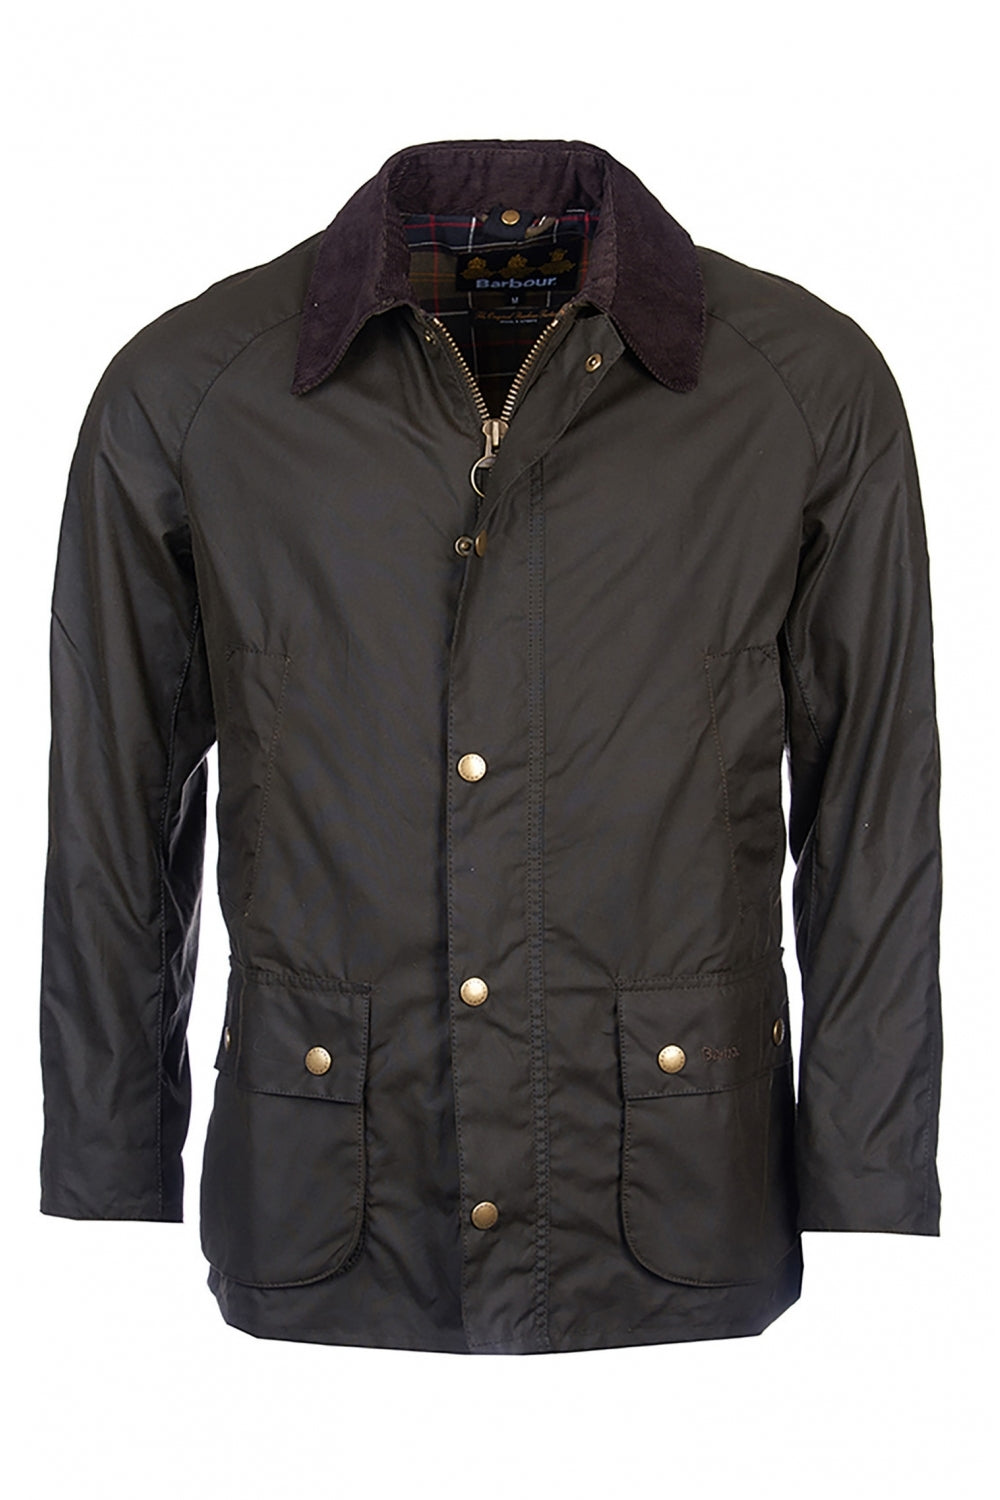 BARBOUR - ASHBY WAX JACKET OLIVE - Dale